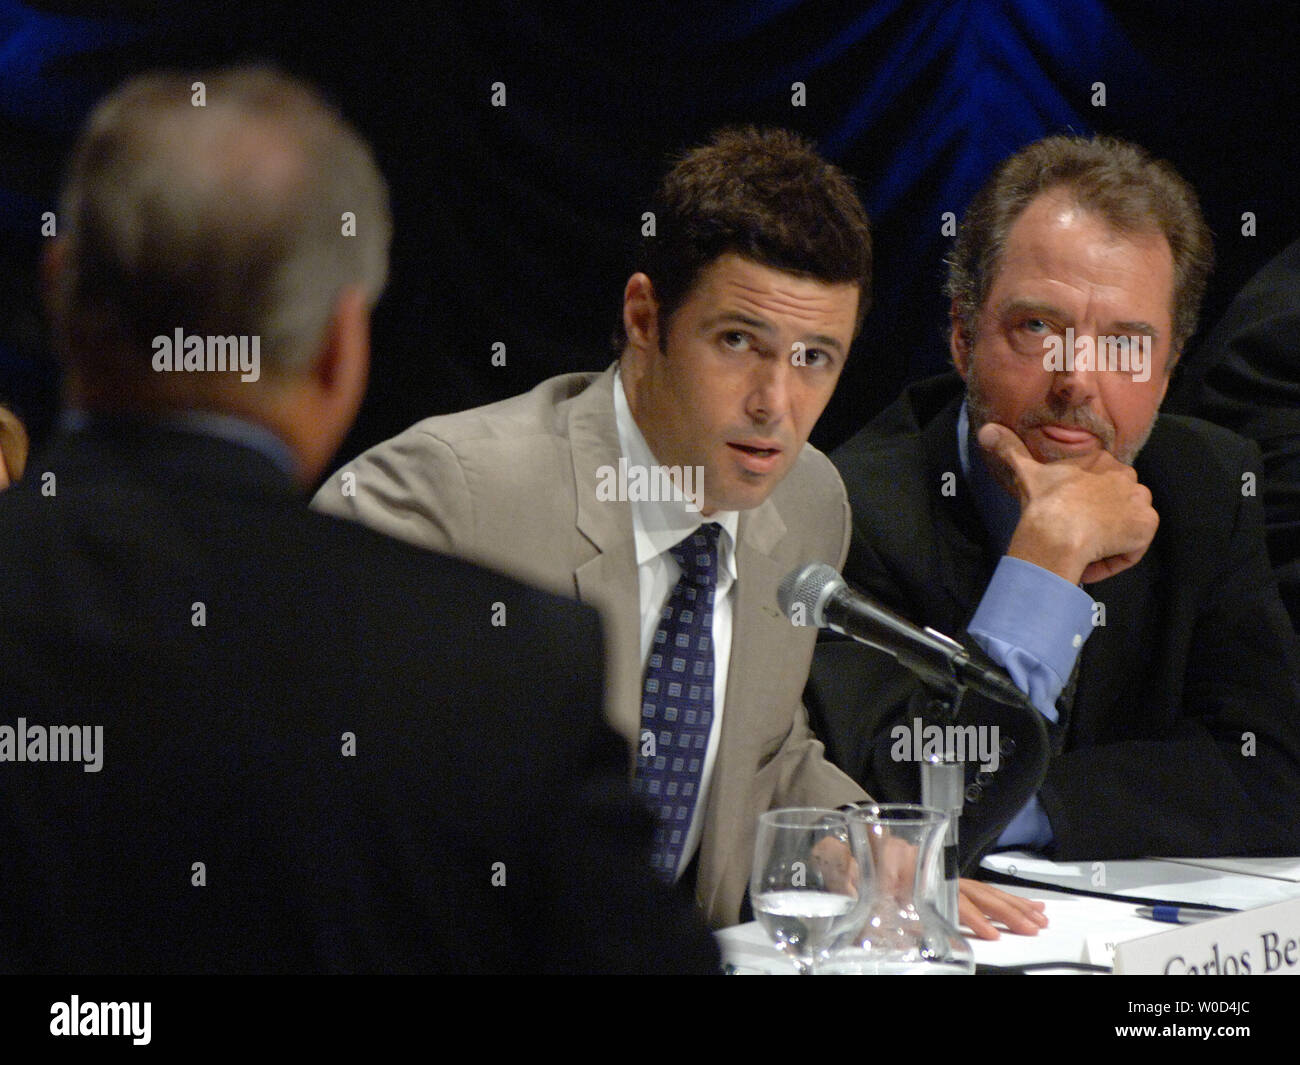 Radio host Rush Limbaugh speaks with '24' actors Carlos Bernard (Tony Almeida) and Gregory Itzin (President Charles Logan), left to right, as he moderates a Heritage Foundation discussion about Fox TV's '24' and the war on terrorism in Washington on June 23, 2006.   (UPI Photo/Roger L. Wollenberg) Stock Photo